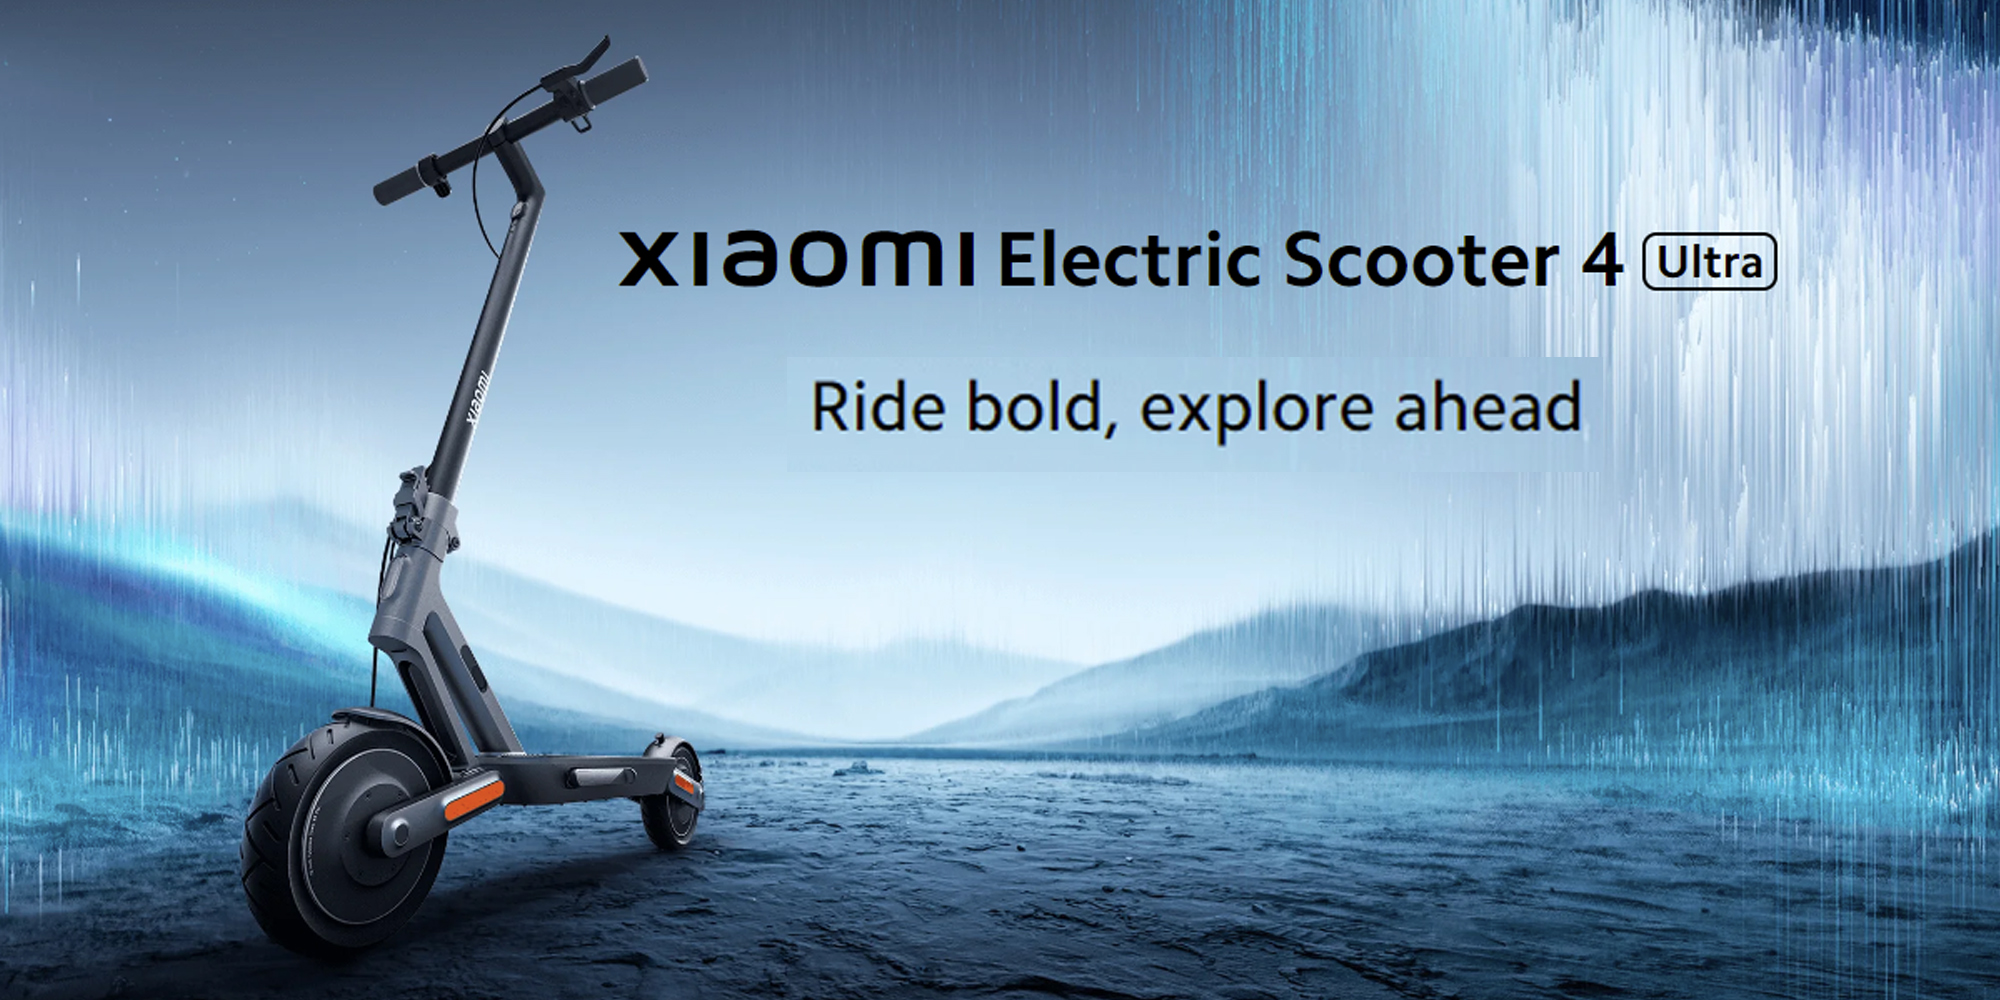 Xiaomi Electric Scooter 4 Ultra Black: Dual Suspension System, 25 km/h Maximum Speed, and 70 km Super Long Range Battery Life